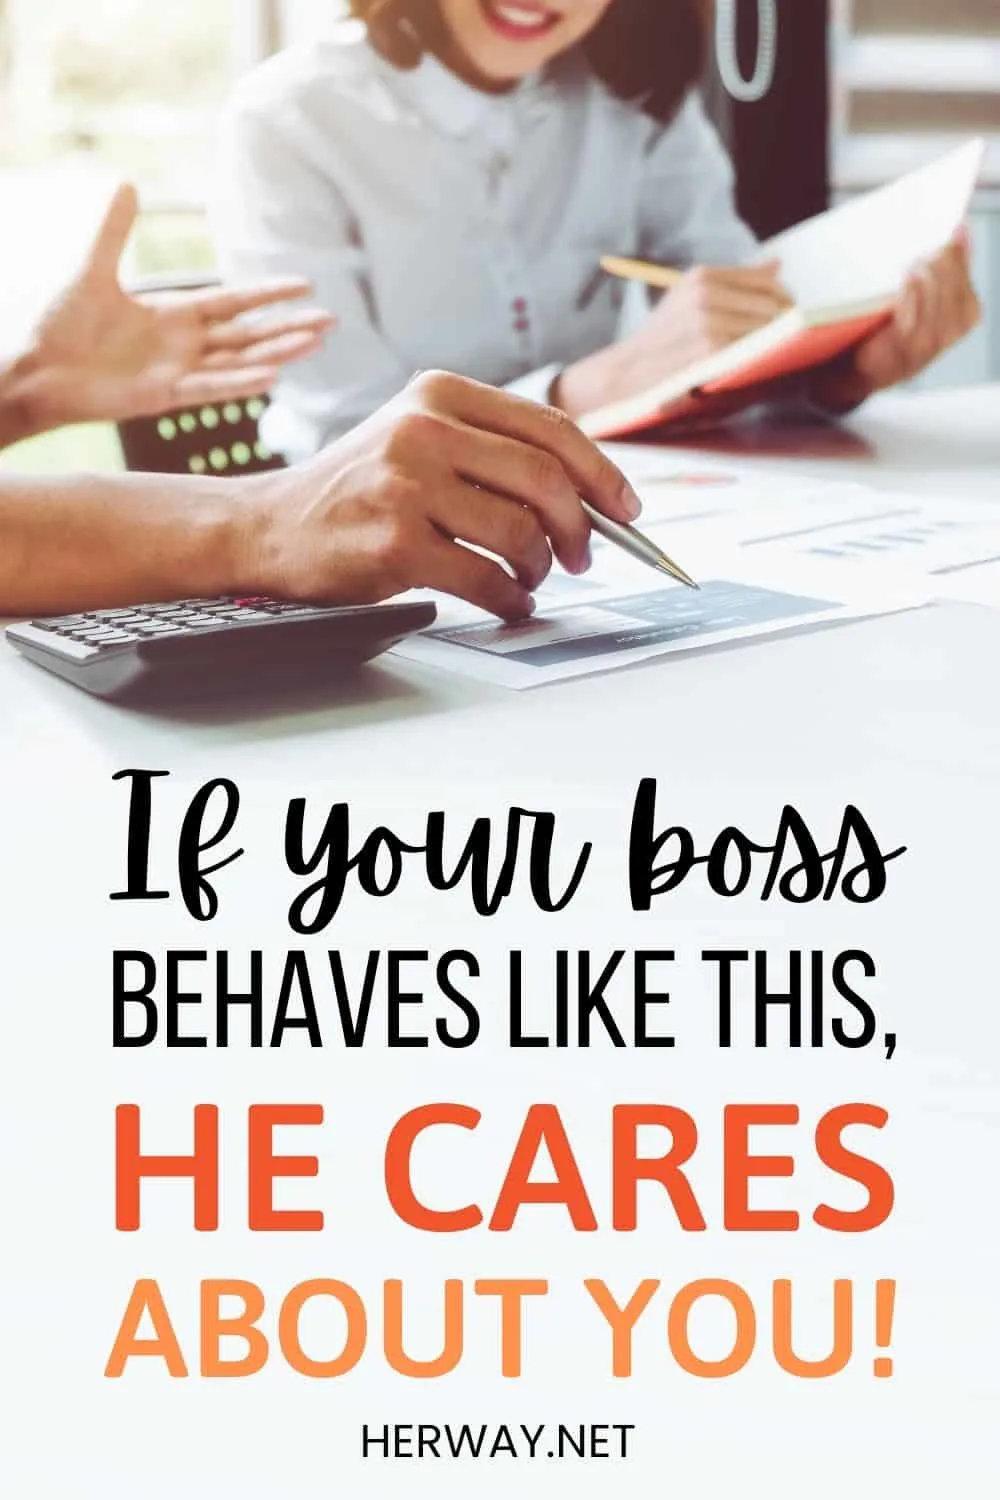 14 Sure Signs Your Boss Cares About You Pinterest